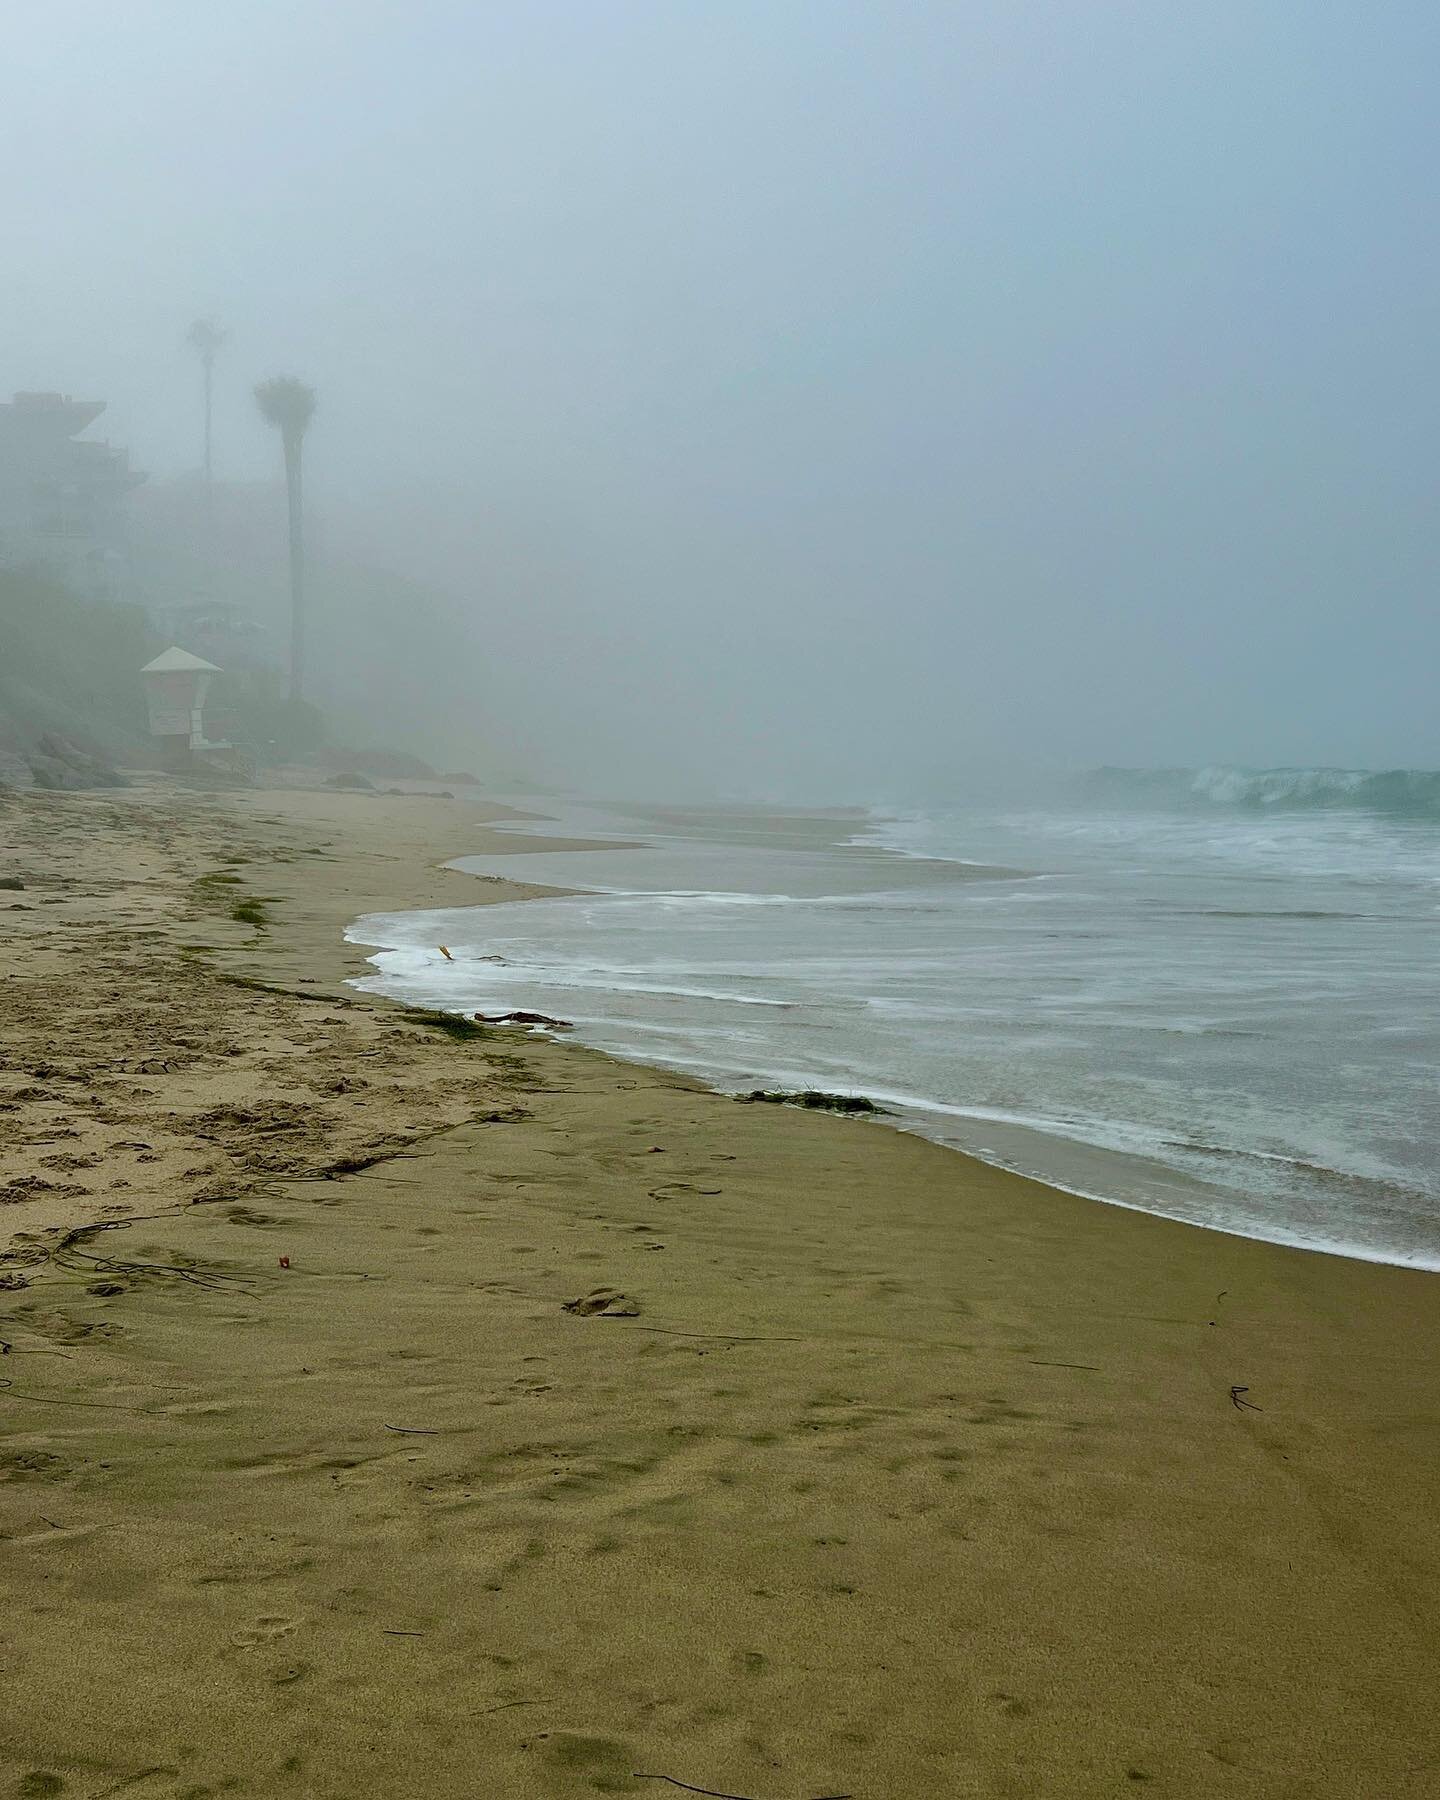 Where&rsquo;s the beach?!
#oberreefphotography #foggymorning #likeit ##